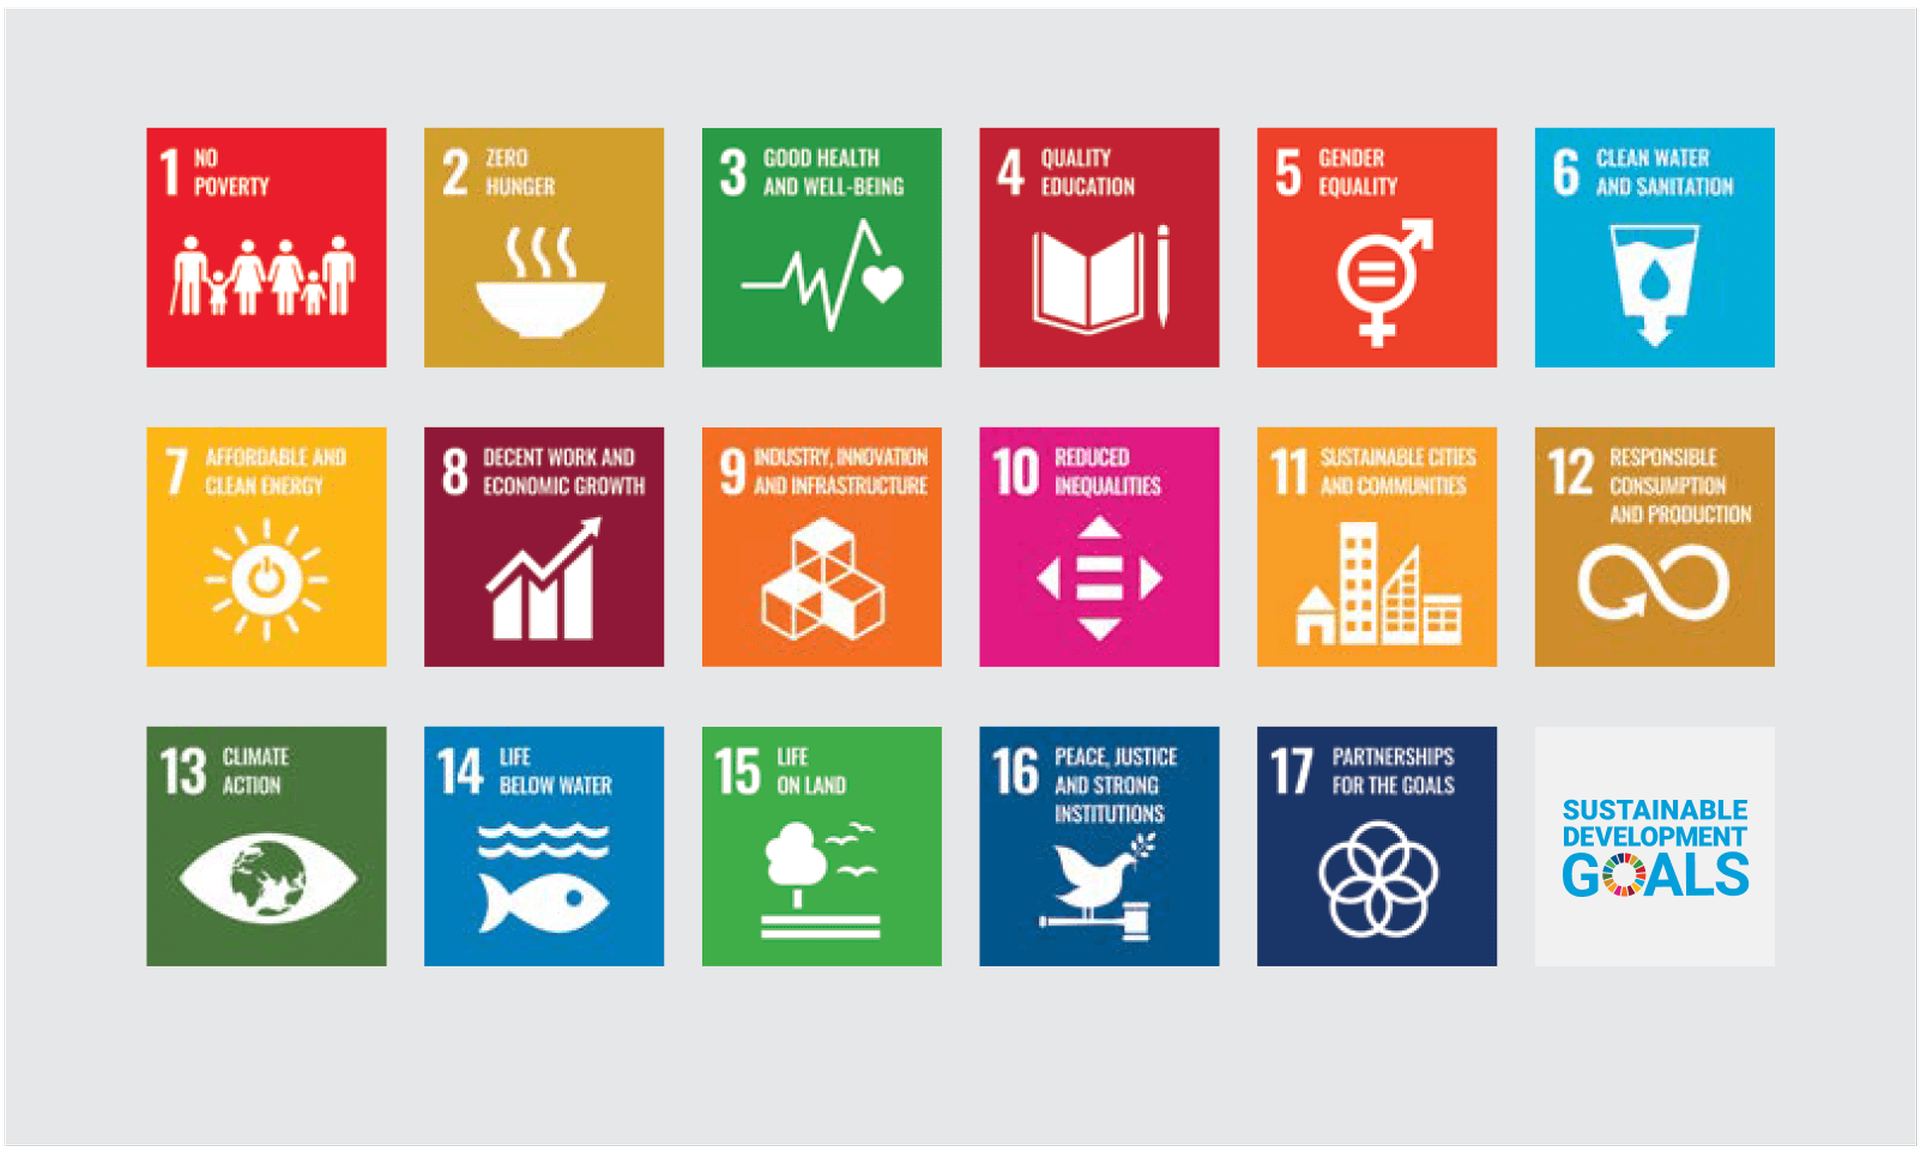 The 17 Sustainable Development Goals colorfully represented with icons